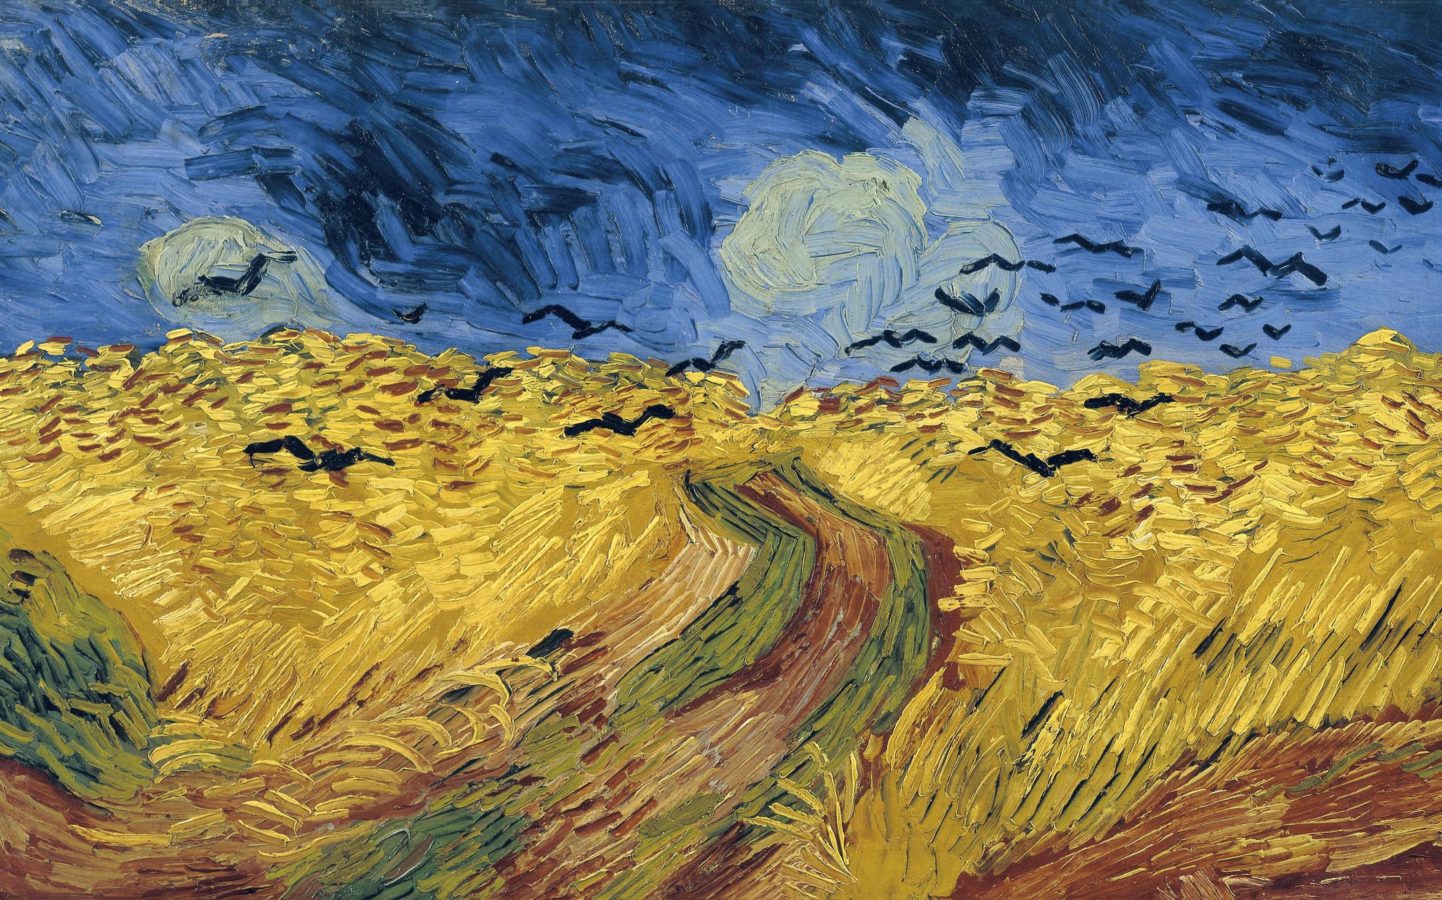 Vincent Van Gogh: The Artist's life Behind the Canvas